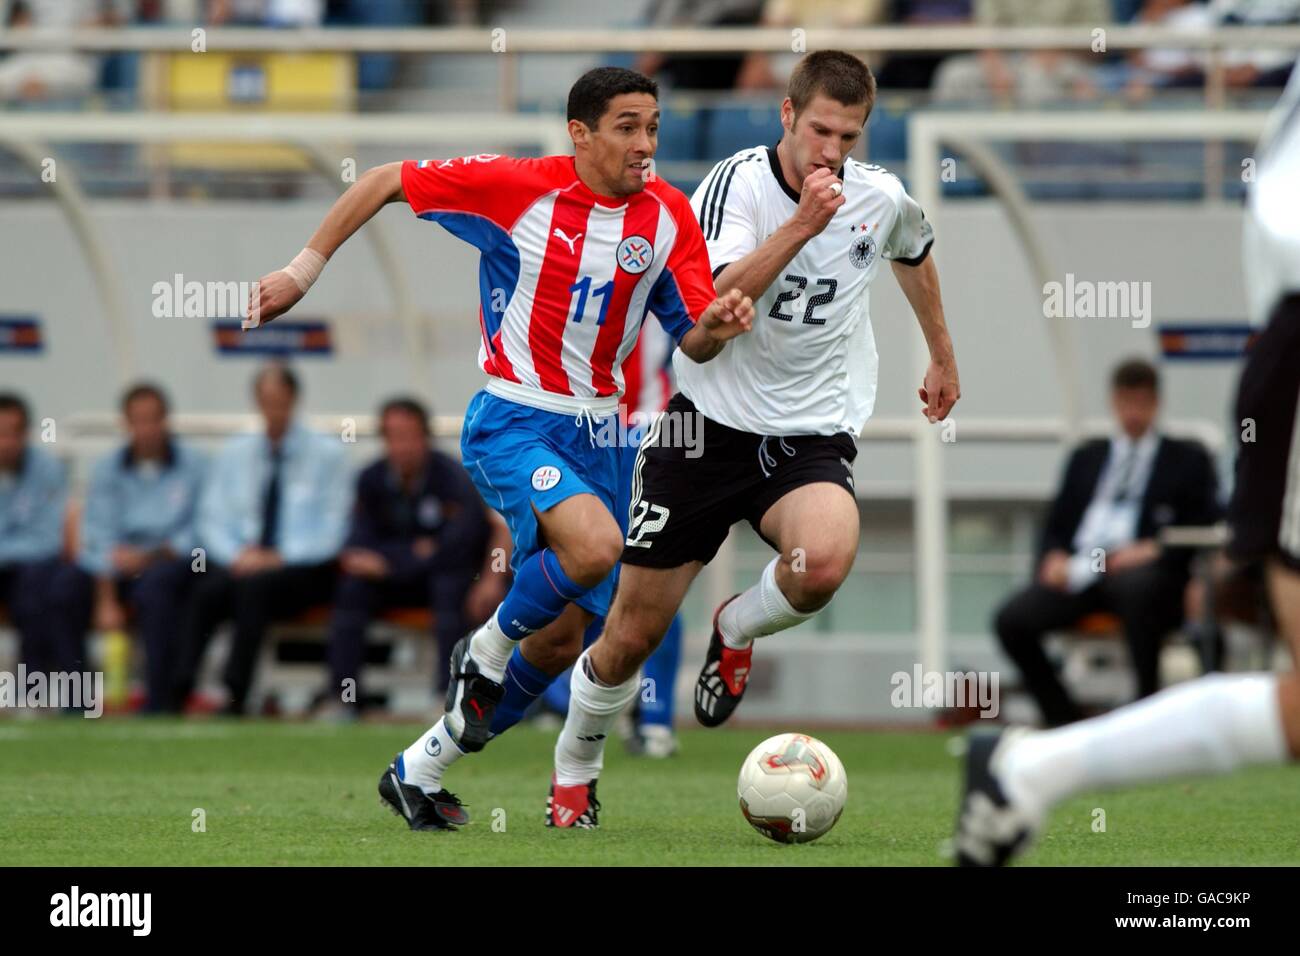 Soccer - FIFA World Cup 2002 - Second Round - Gernany v Paraguay. Germany's Torsten Frings and Paraguay's Jorge Campos Stock Photo